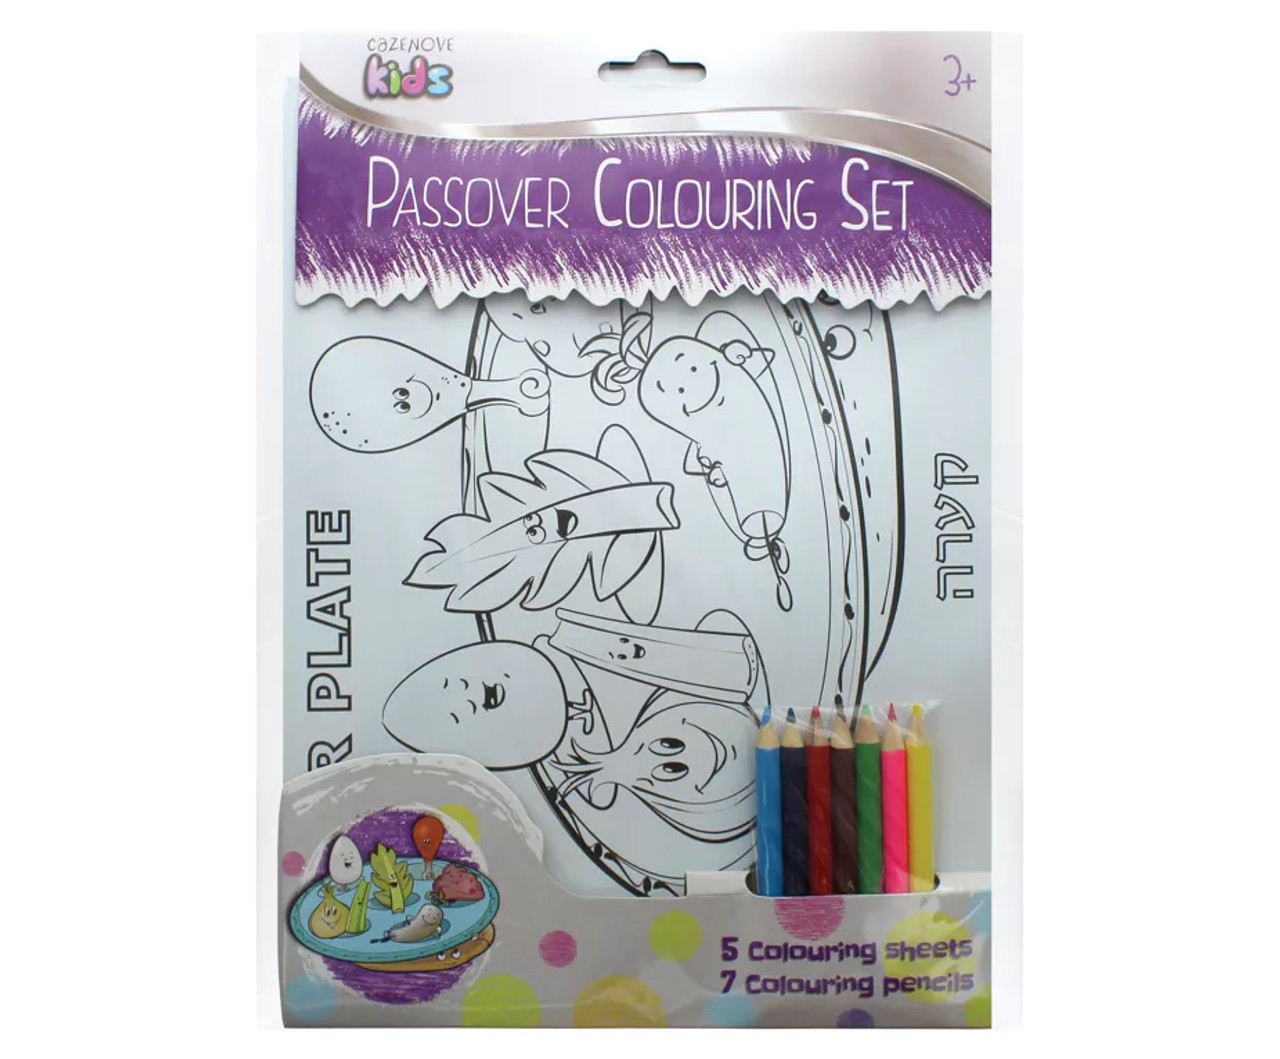 Passover Coloring Set  Buy at the Jewish School Supply Company